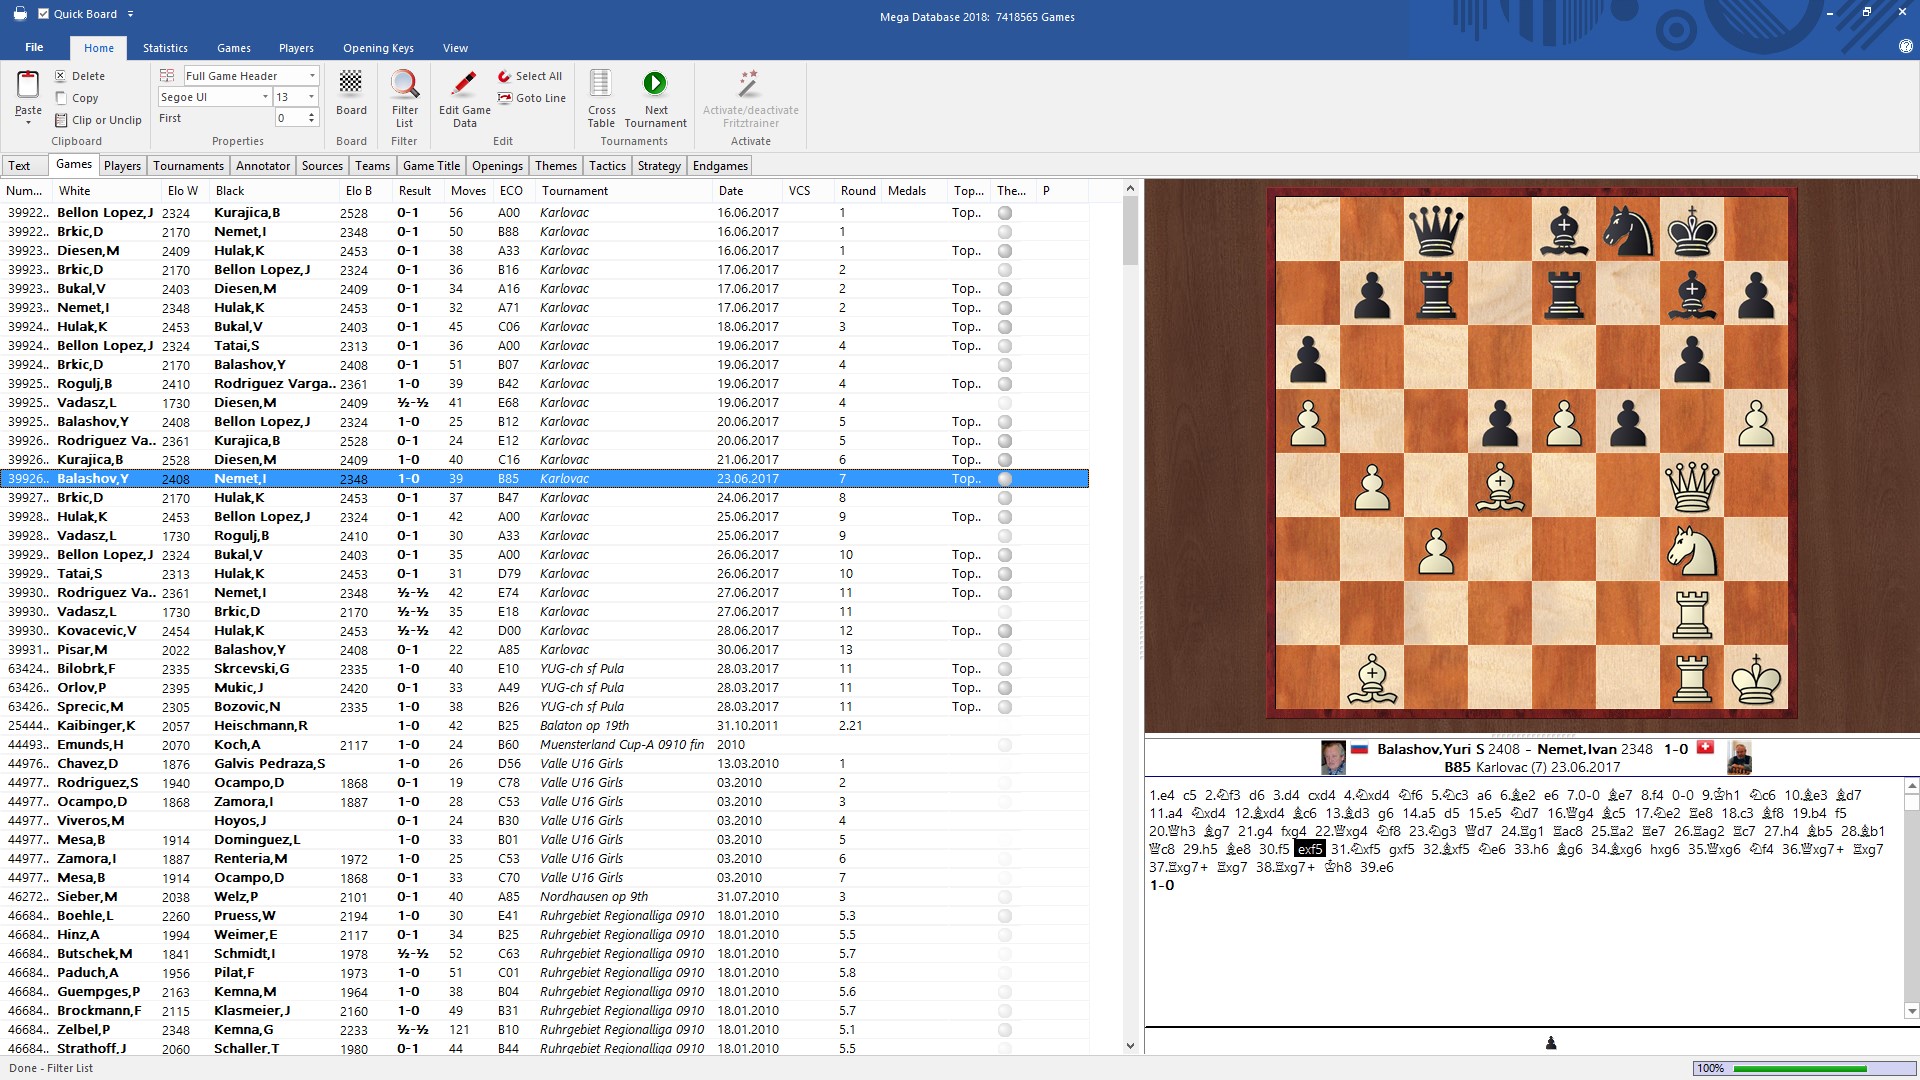 Chess database searches for annotated games (ChessBase Tip #0004) 